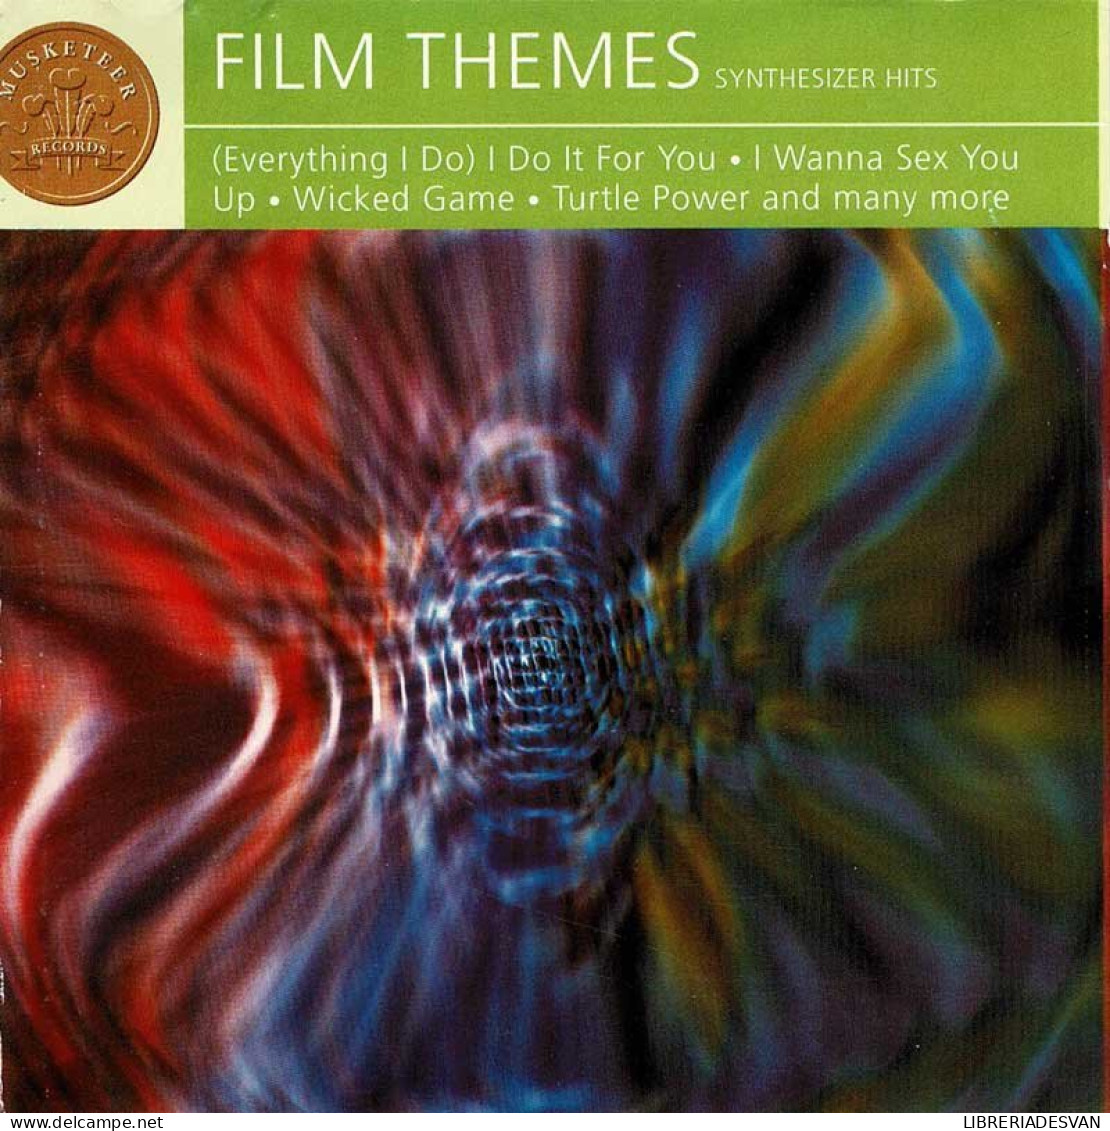 The London Studio Orchestra, The Hollywood Studio Orchestra - Film Themes Synthesizer Hits. CD - Musica Di Film